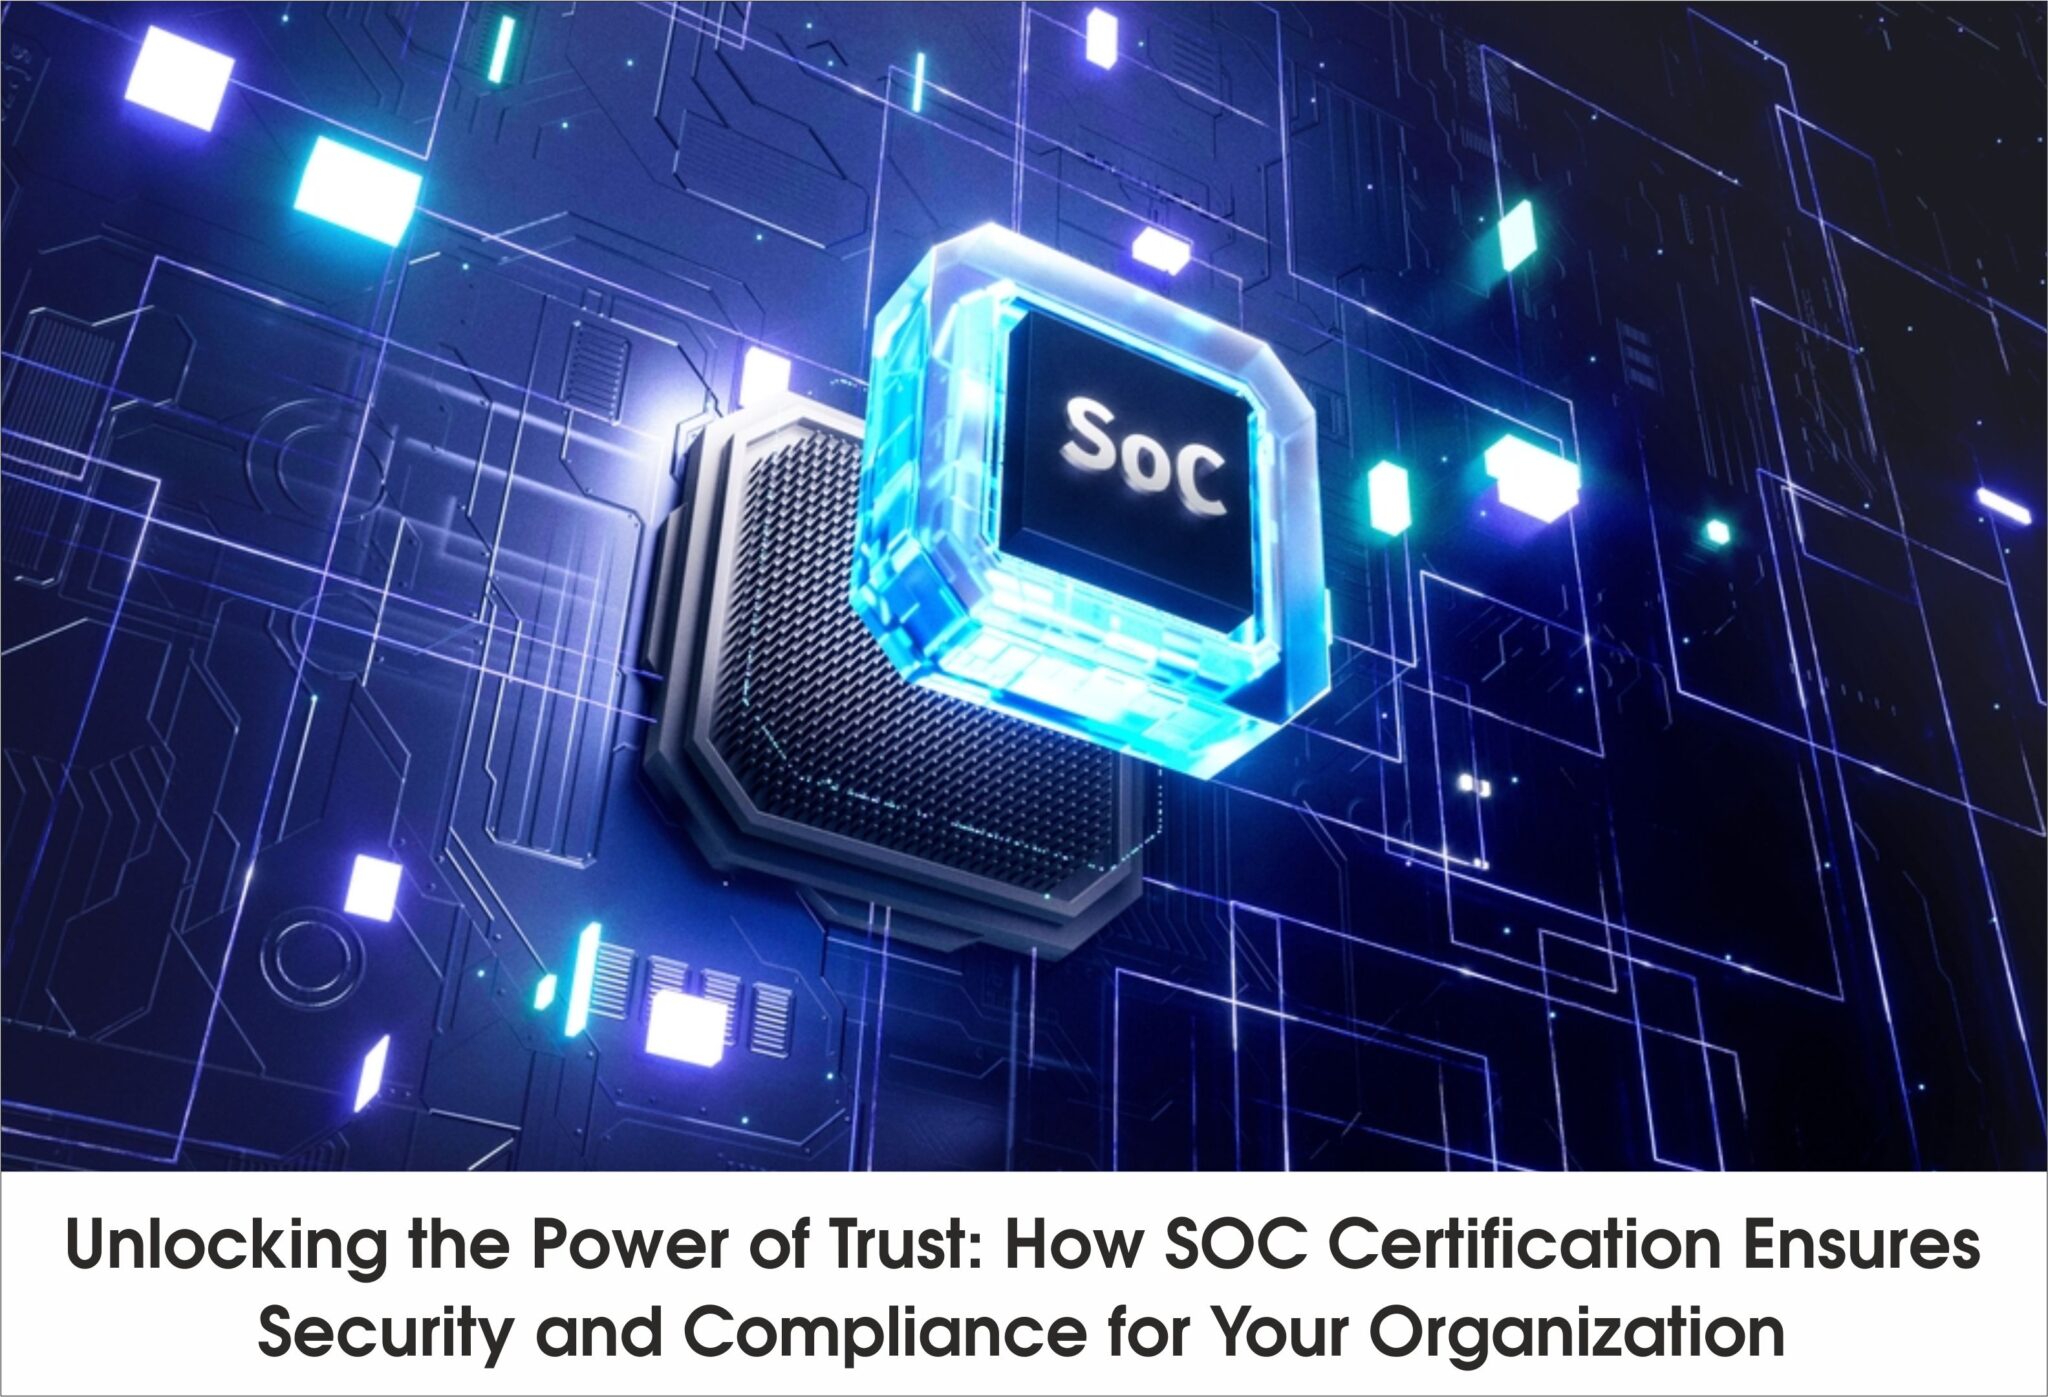 Unlocking the Power of Trust: How SOC Certification Ensures Security and Compliance for Your Organization